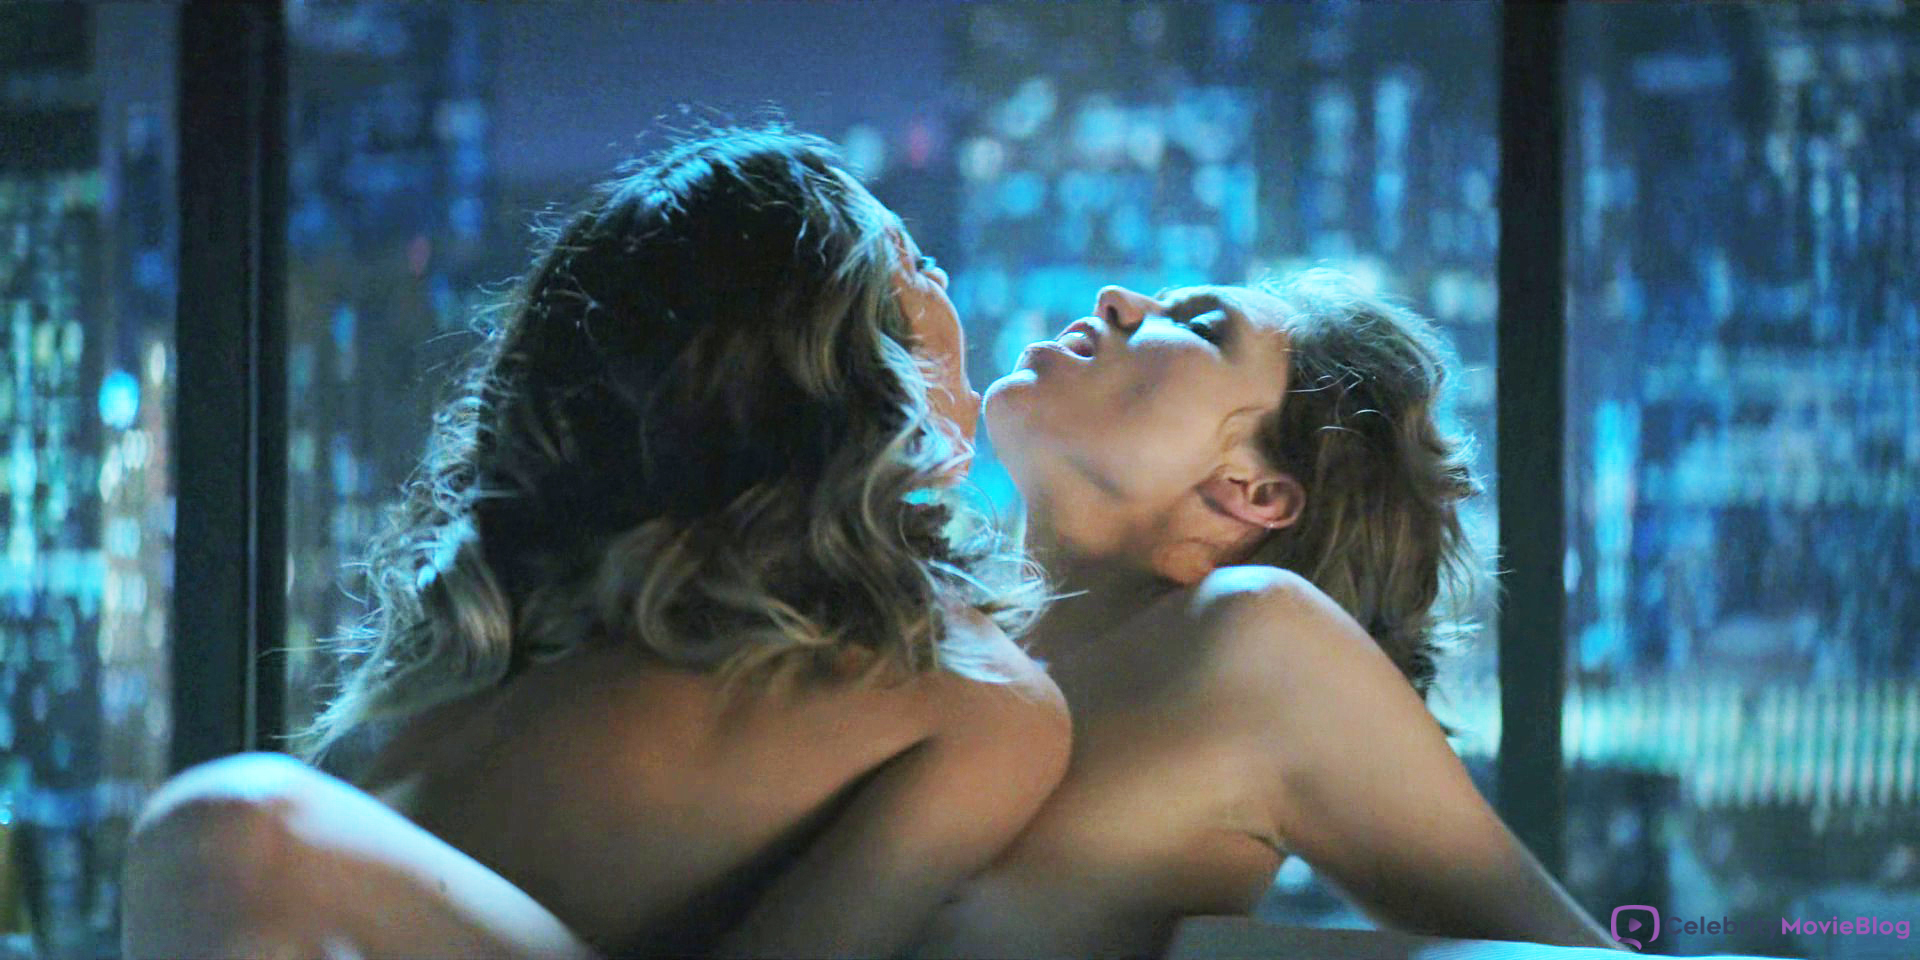 Lesbian Sex Scene - Lili Simmons Nude Lesbian Sex in Power Book IV Force - Celebrity Movie Blog